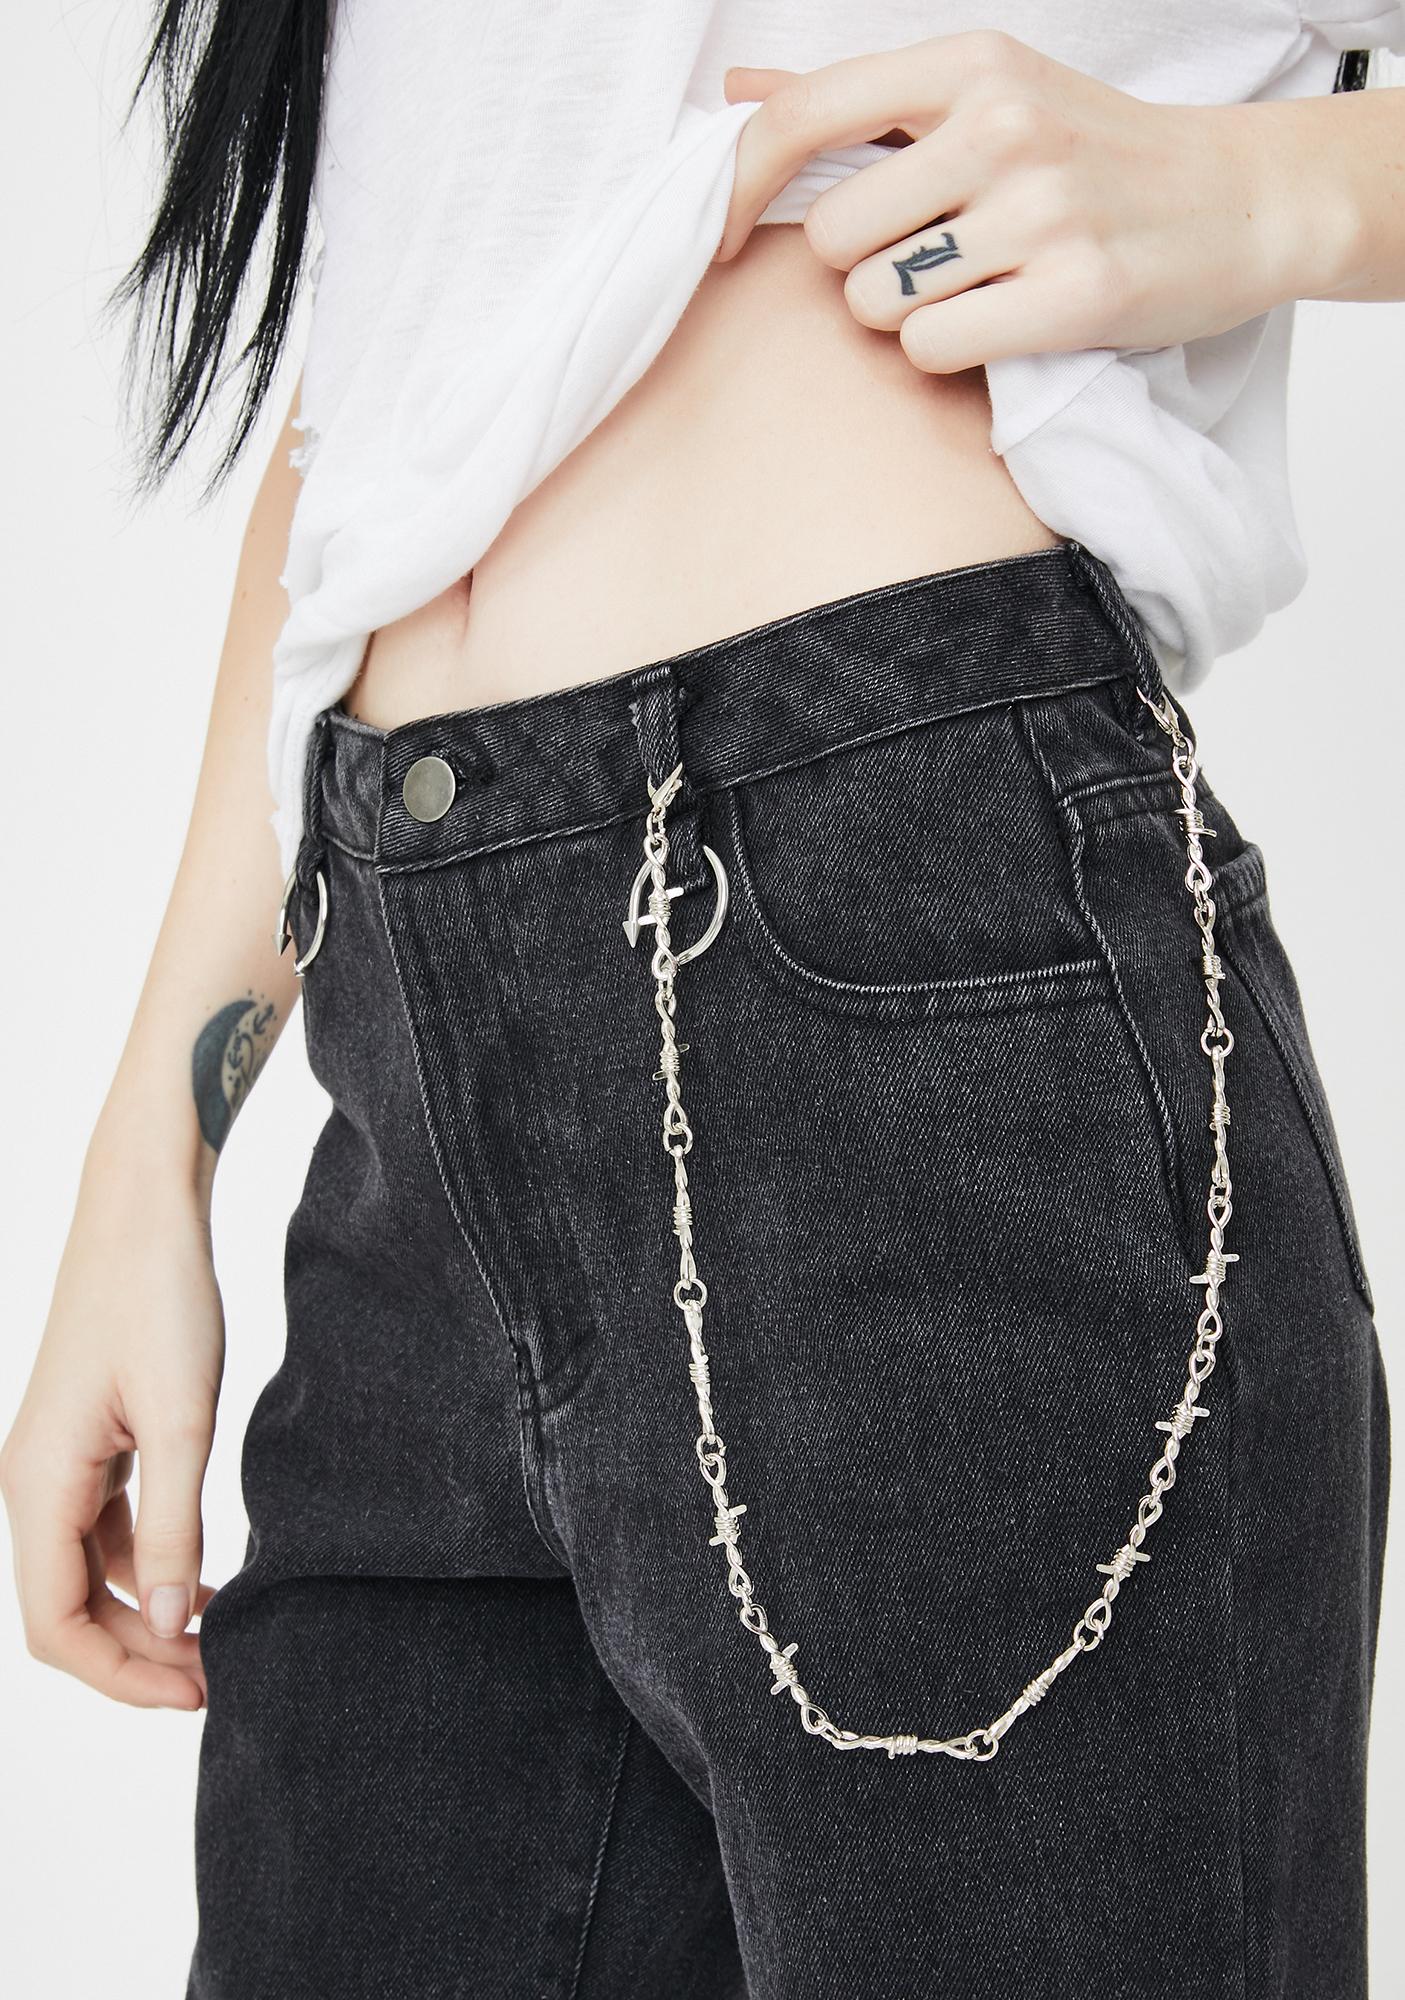 barbed wire jean chain